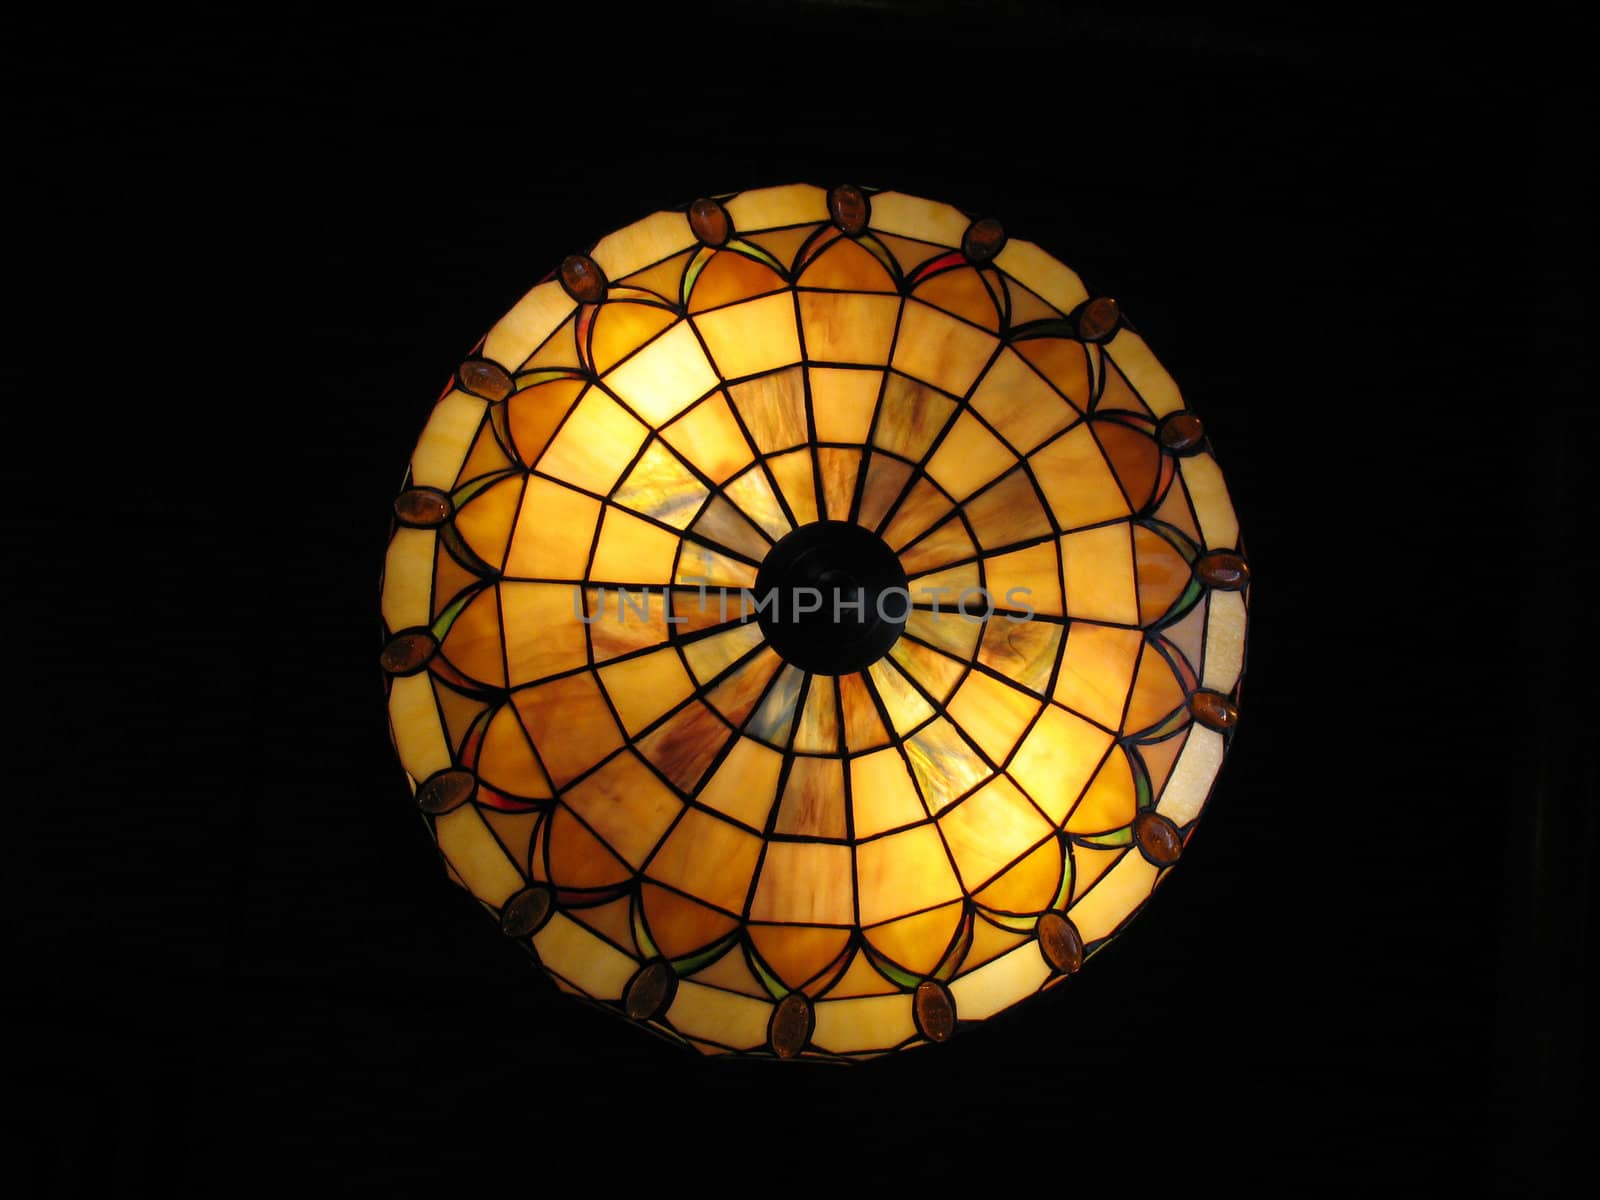 stained glass lamp by graficallyminded